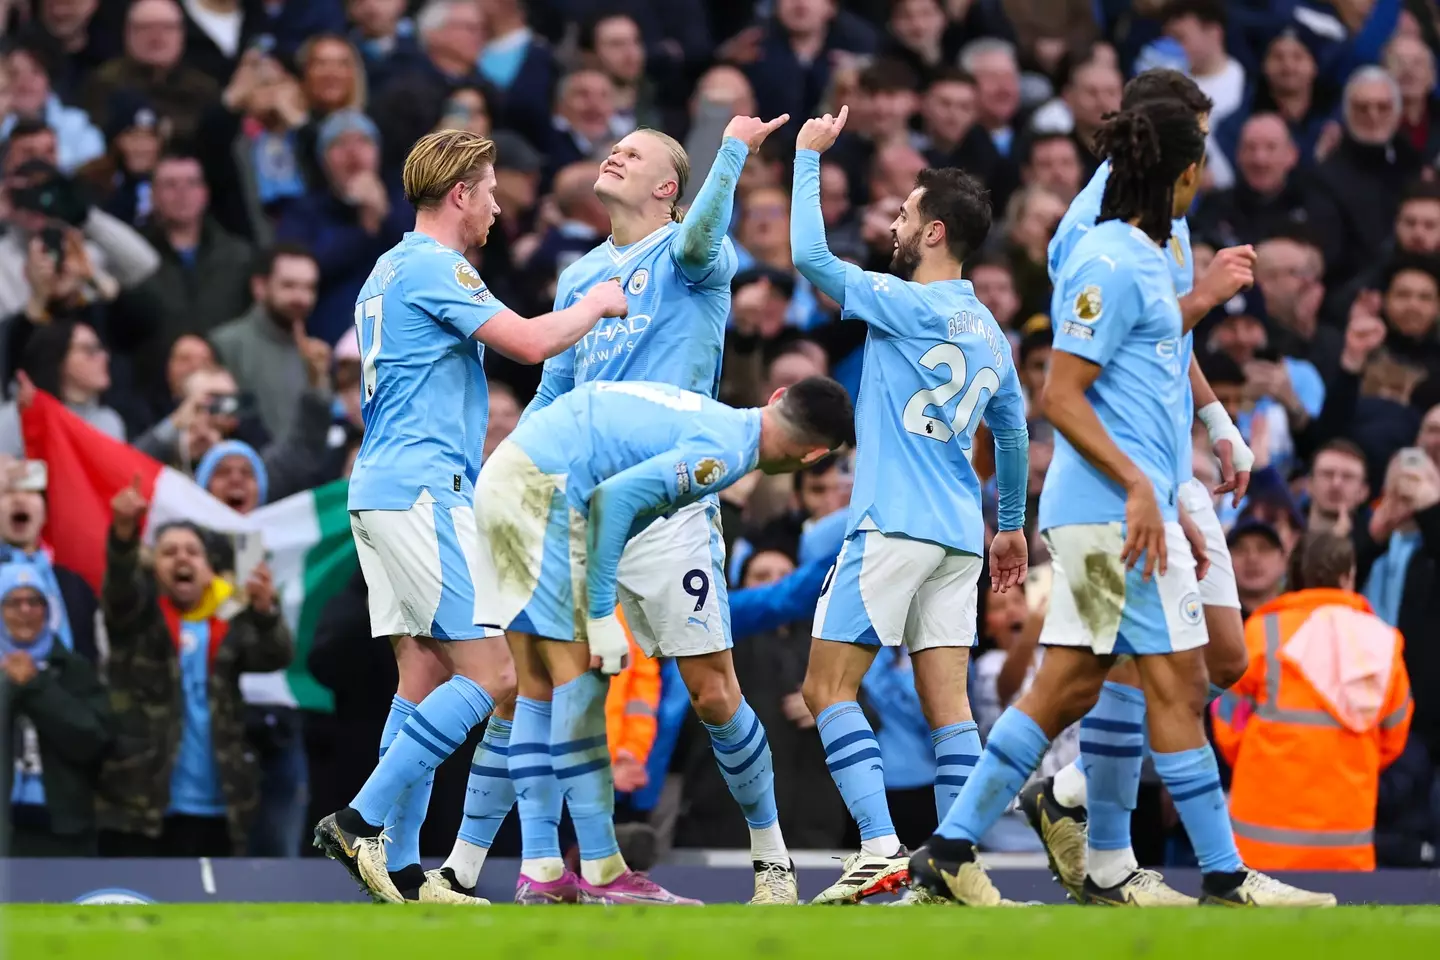 Erling Haaland scored Man City's third goal in the victory over Manchester United. (